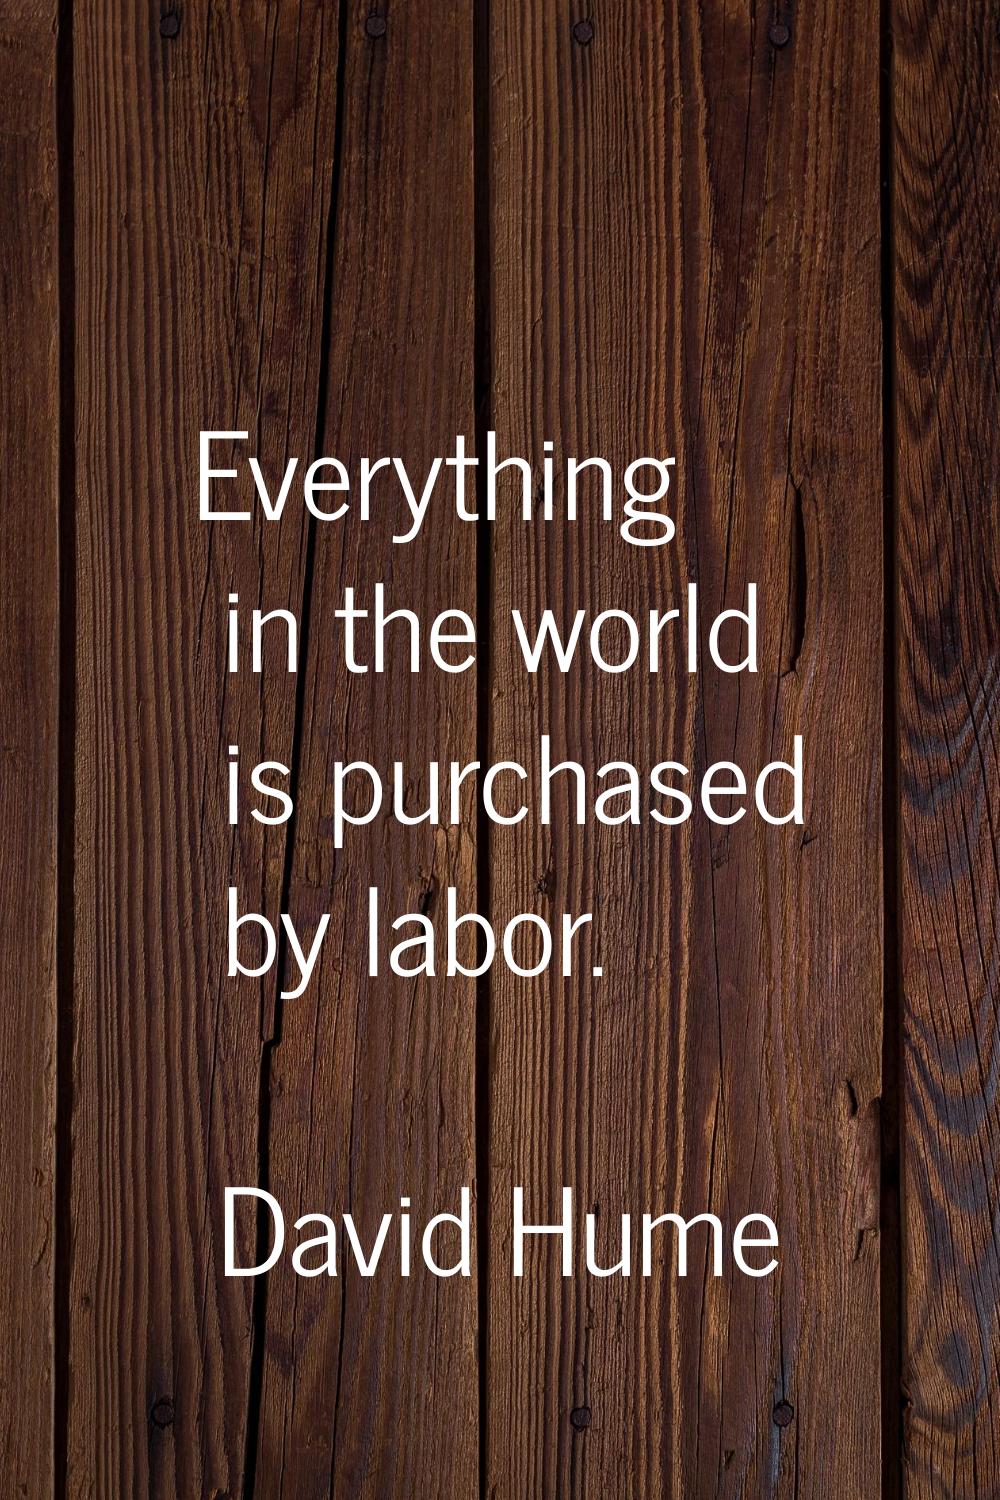 Everything in the world is purchased by labor.